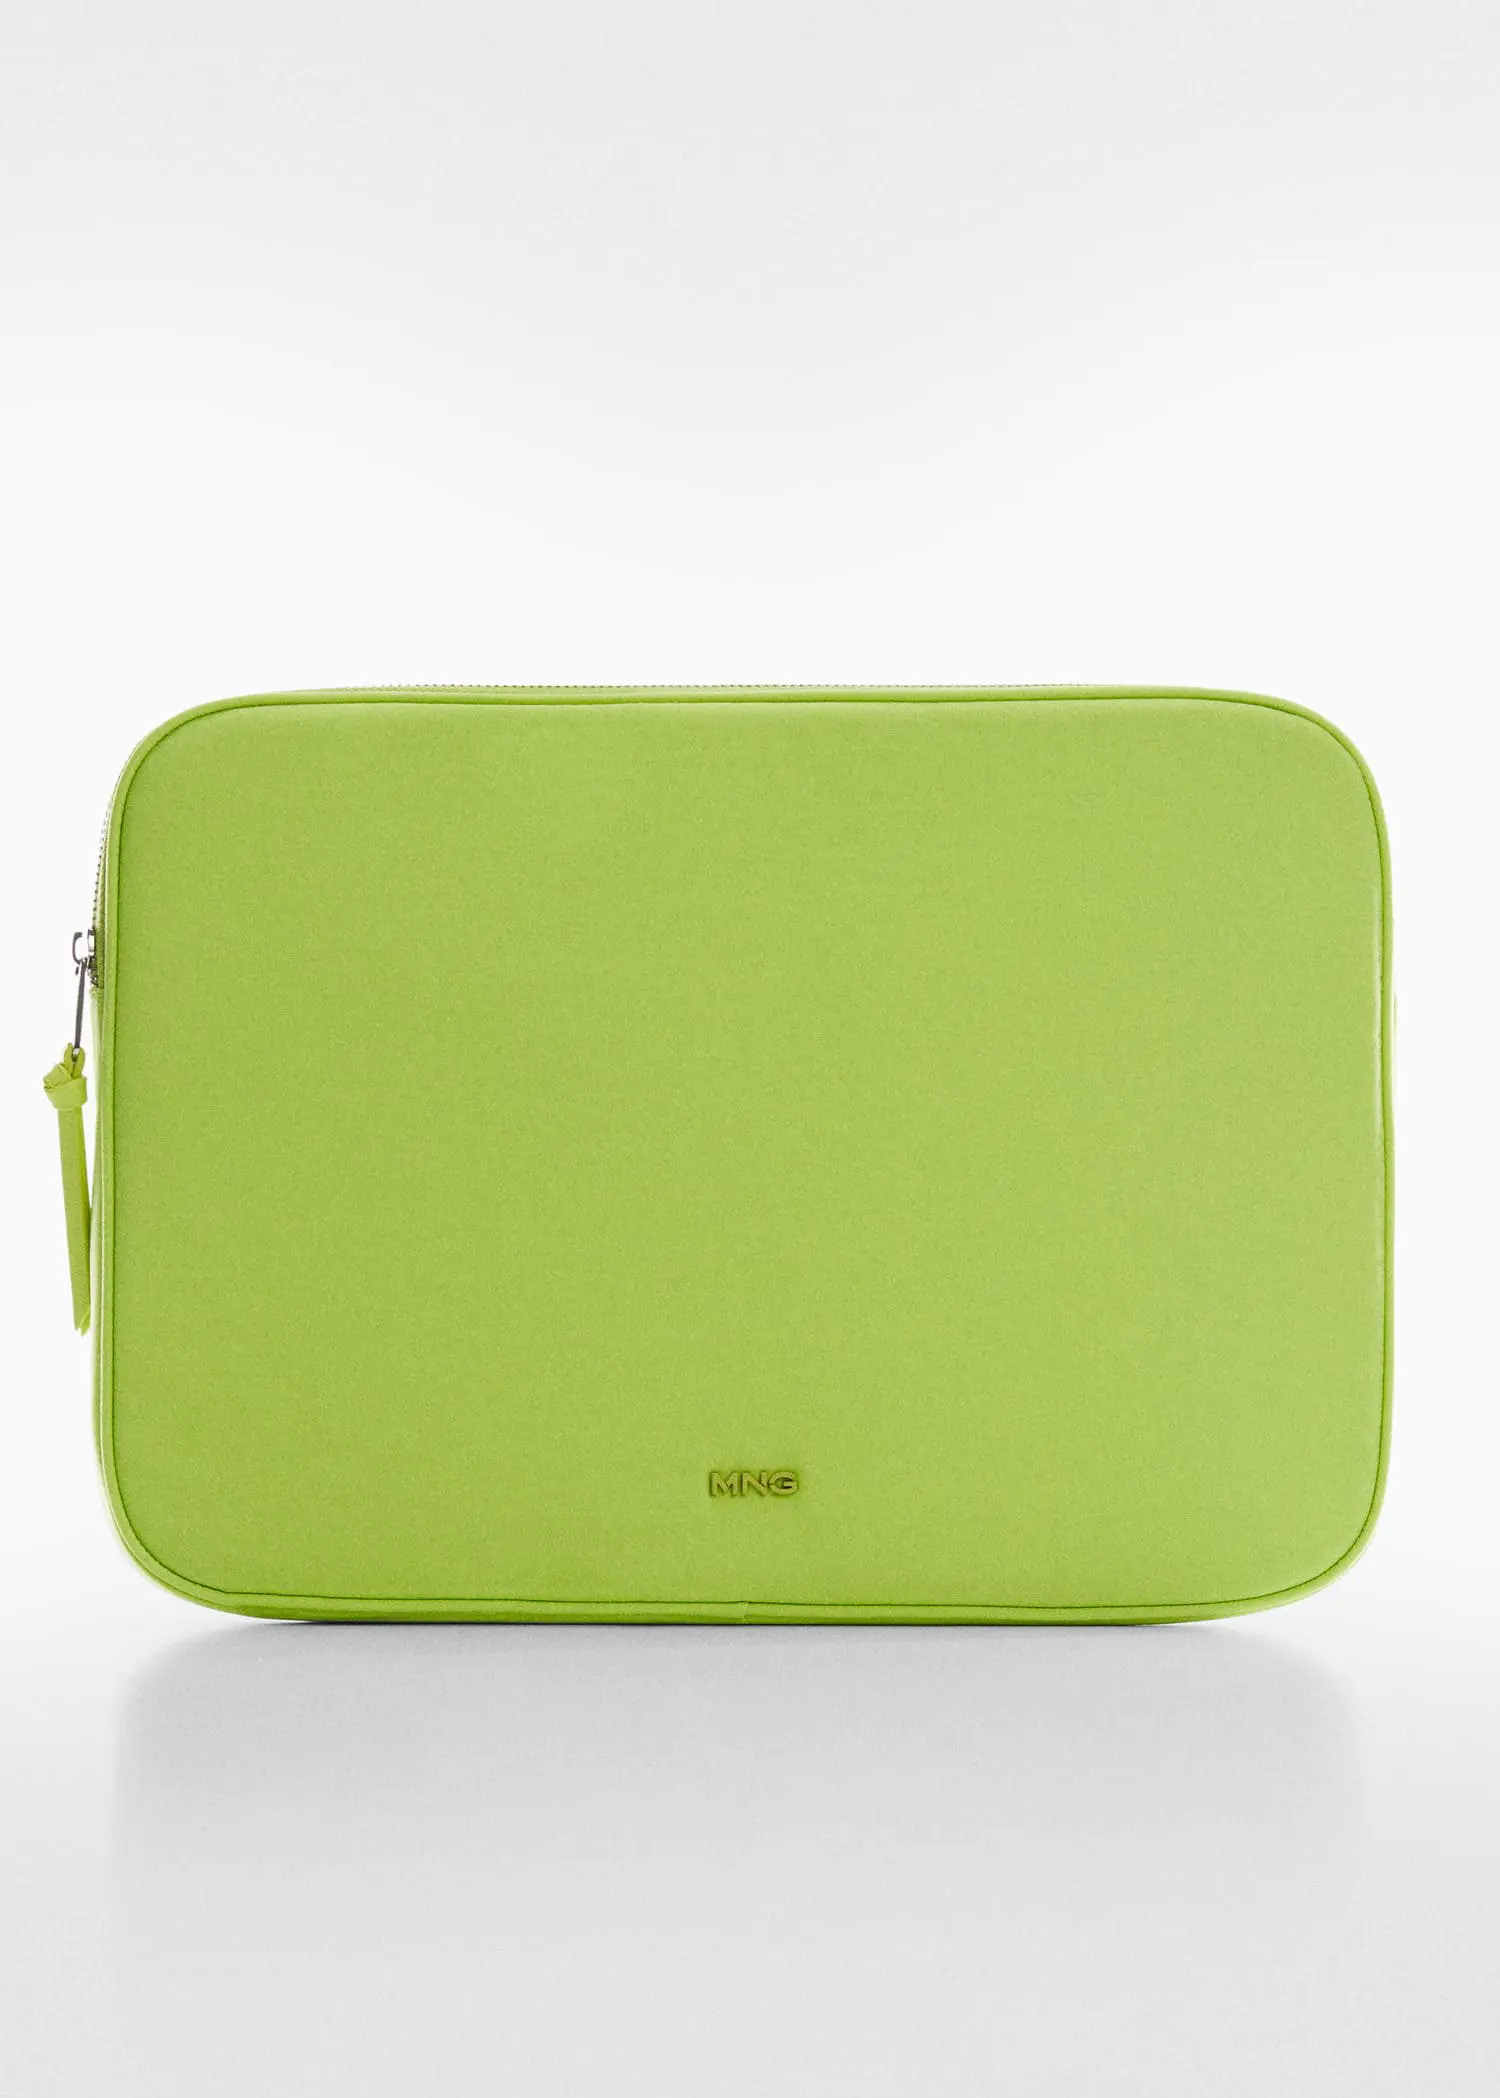 Mango Double-compartment laptop case. a lime green case sitting on top of a white table. 